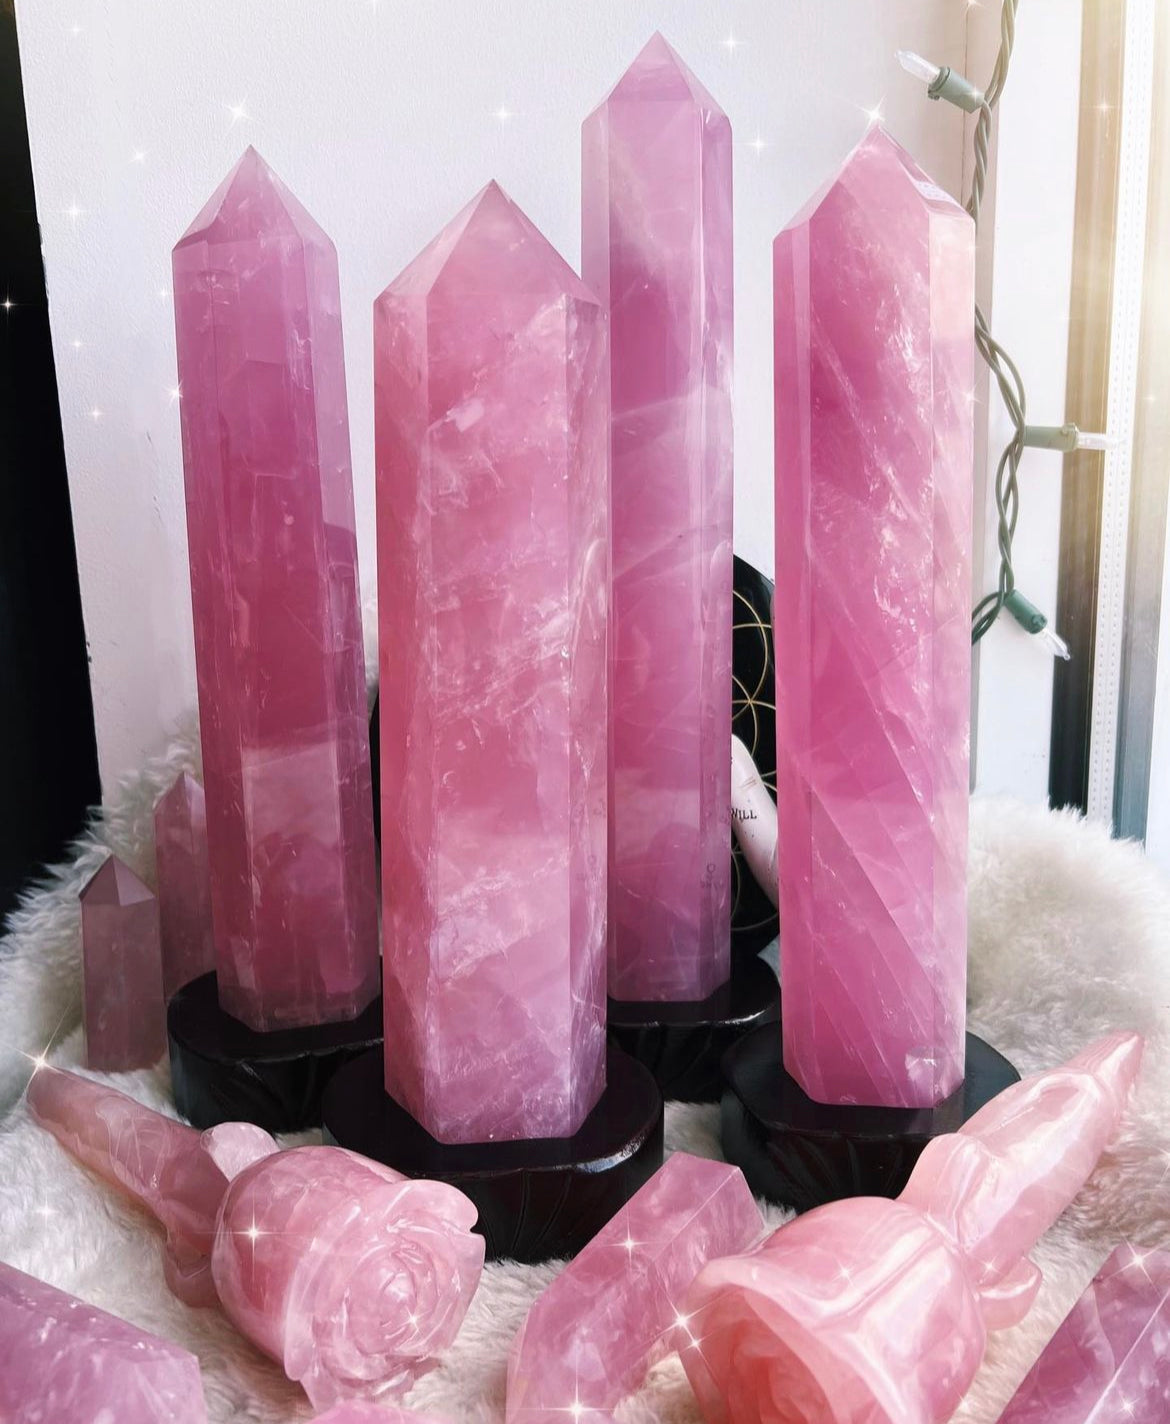 Top 5 Crystals for Love and Self-Love